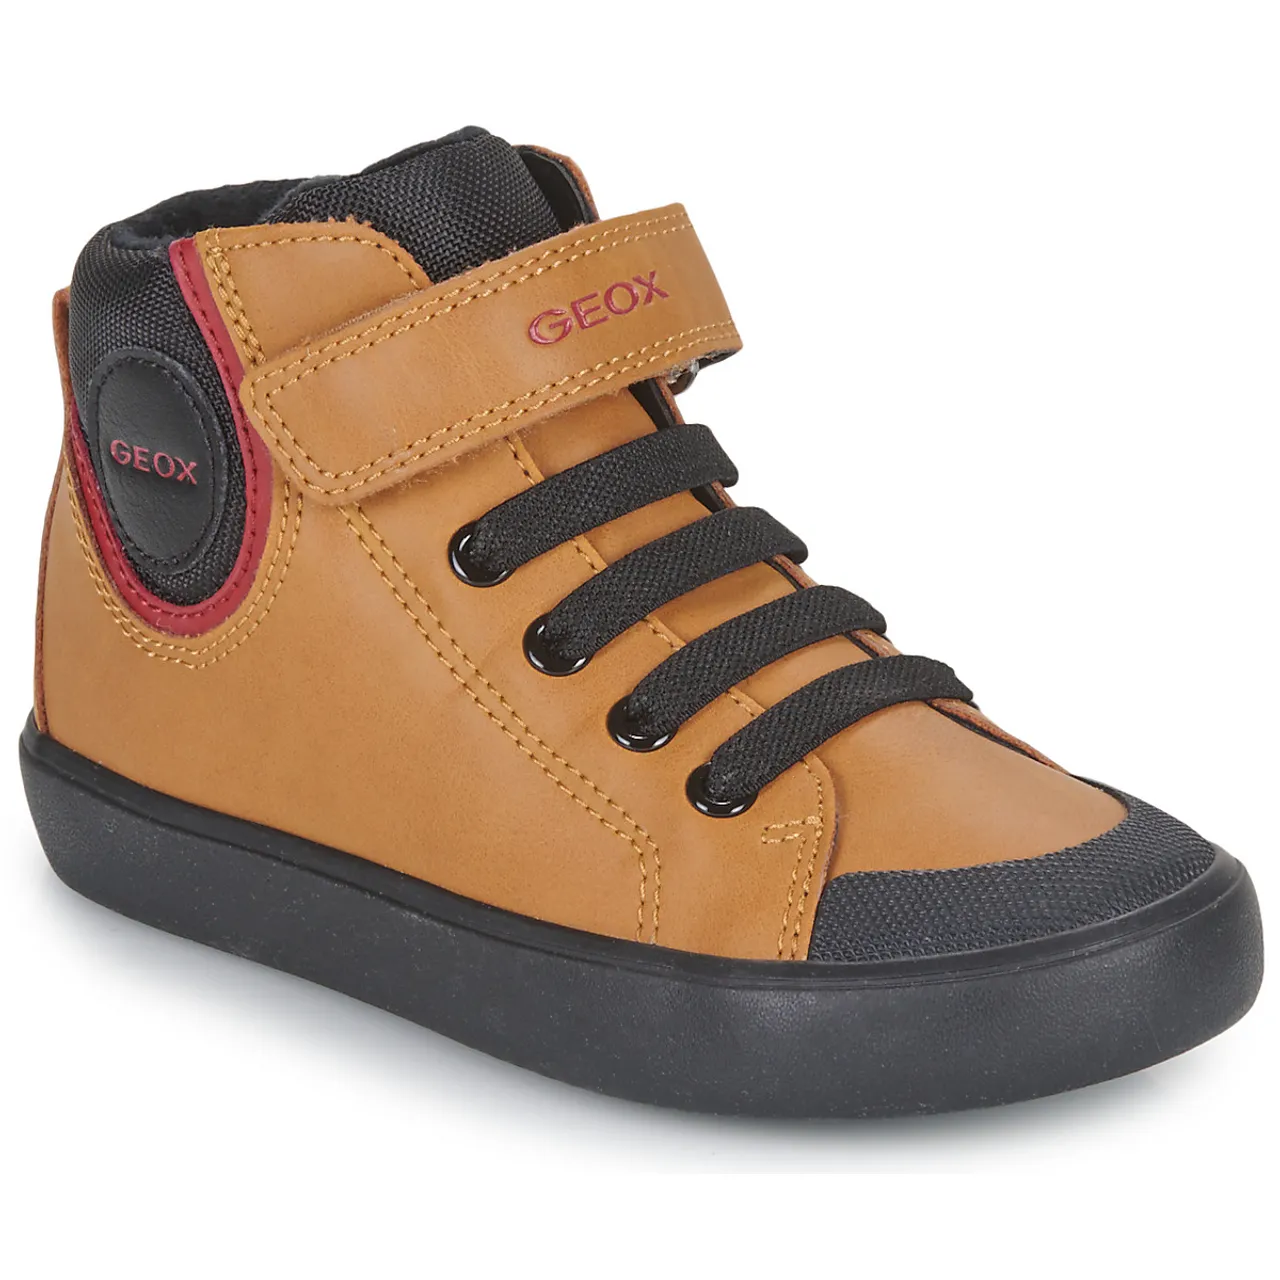 Geox  J GISLI BOY F  boys's Children's Shoes (High-top Trainers) in Brown